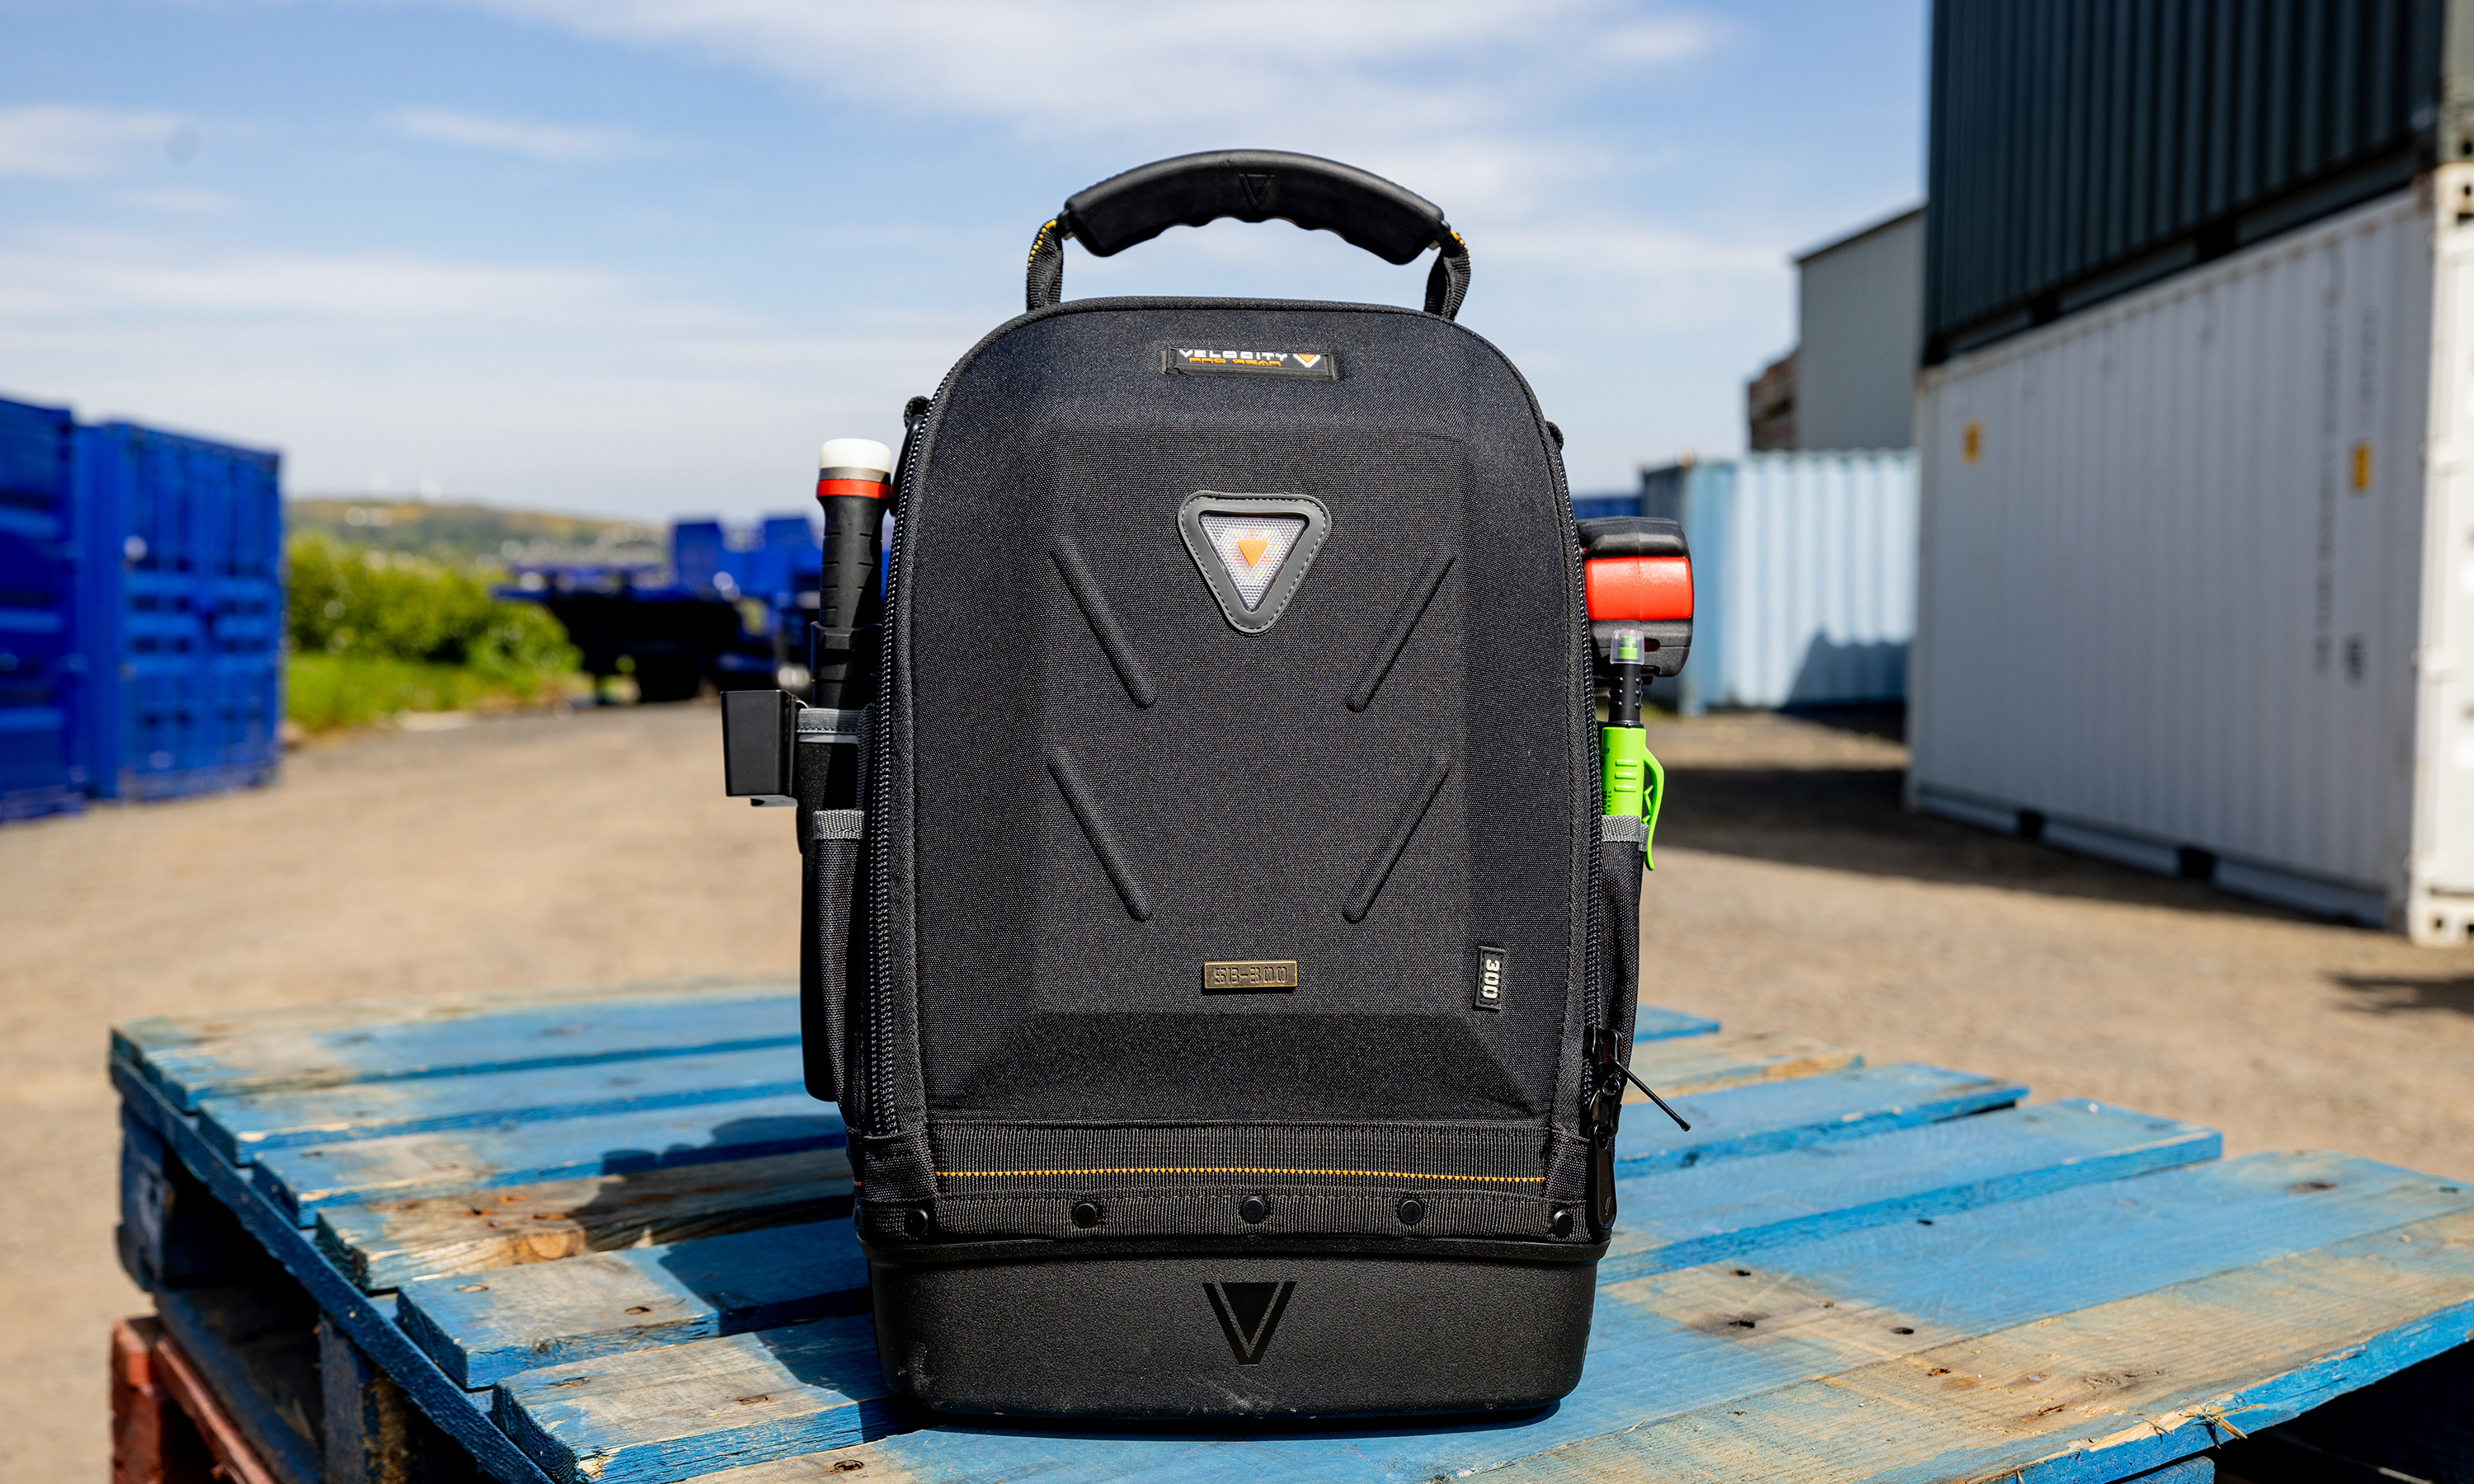 Velocity Stealth 300 Service Bag closed, on top of a blue pallet